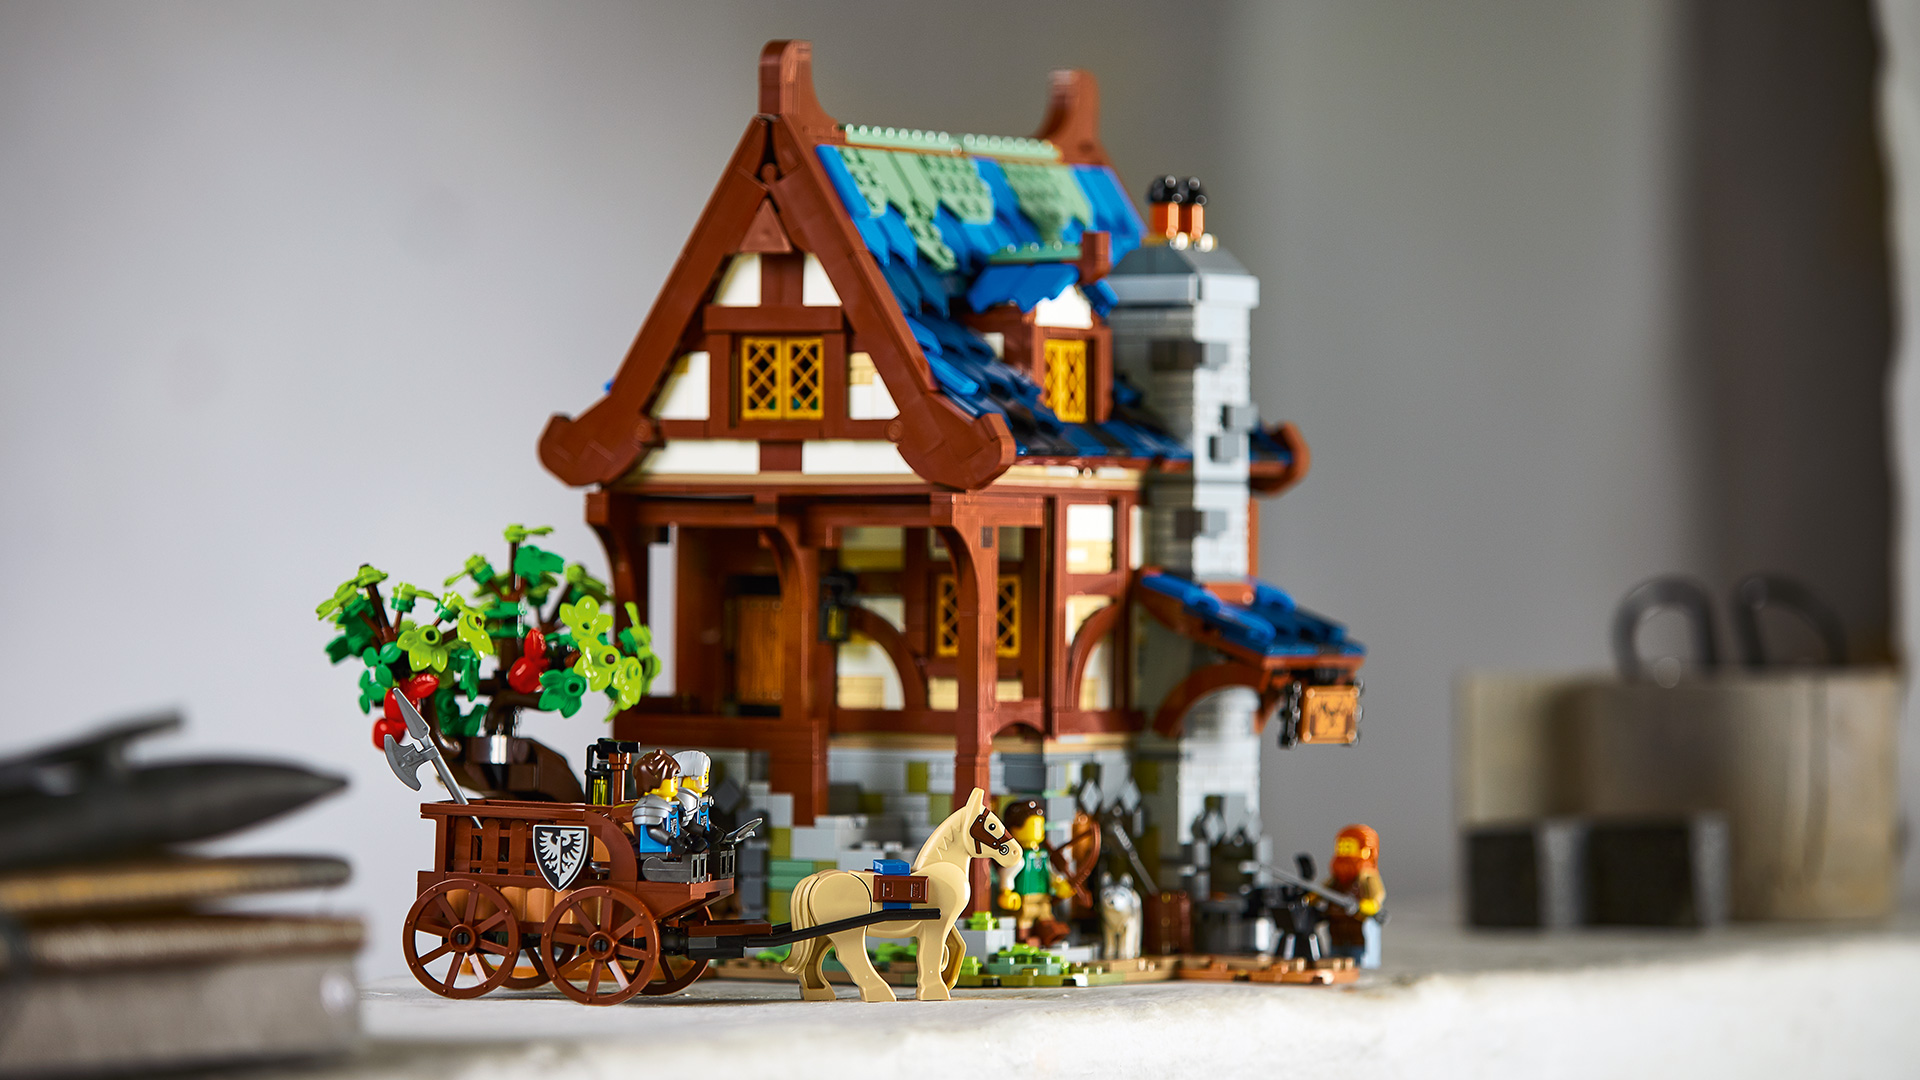 LEGO 21325 - LEGO Ideas Medieval Blacksmith  LEGO Ideas has taken a leaf out of the history books with the design of its latest set, a charming Medieval Blacksmith’s house. The new set is based on an original design by an avid LEGO builder, which achieved over 10,000 votes from LEGO fans worldwide – giving it the green light to go into production.   •Age – 18+ •Model measures: oHeight: 27cm/10.5in. oWidth: 27cm/10.5in. oDepth: 21cm/8in. •2,164 pieces •Magnificently detailed and architecturally accurate medieval blacksmith’s building and garden for display. •Includes a glowing blacksmith forge and a horse figure pulling a buildable cart Four Minifigures, including two new-for-March-2021 Black Falcon Knights. • Easily accessible, three-level building with a bedroom, kitchen and workshop packed with accessory elements such as tools, coal and armour.